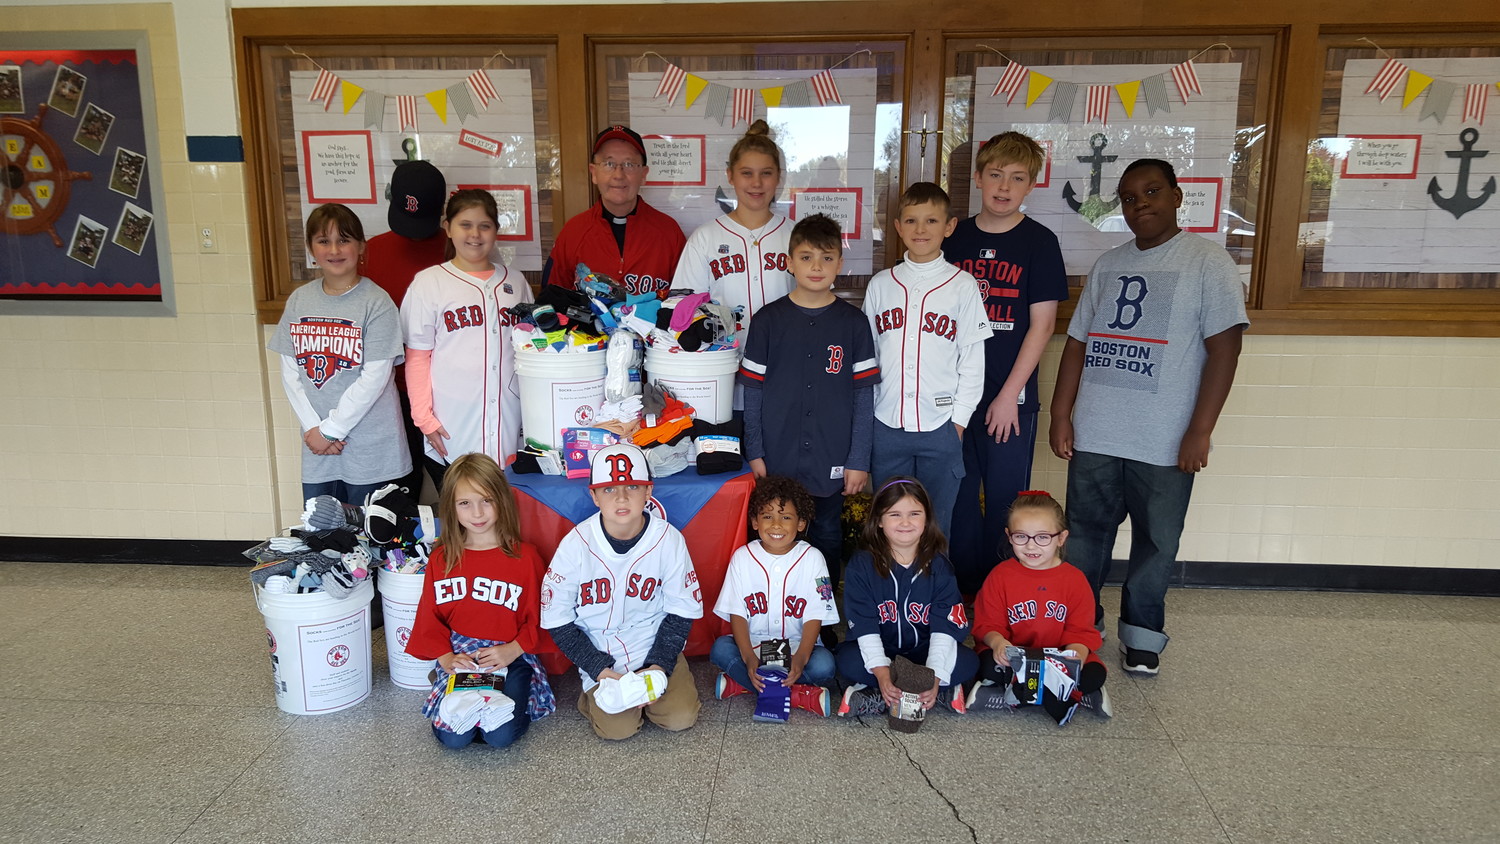 All Saints STEAM Academy in Middletown celebrated the Red Sox playing in the World Series by holding a Socks for the Sox collection. Students brought in socks and gloves that will be donated to a local charity. Father Francis O’Loughlin, a loyal Red Sox fan and pastor of Jesus Saviour and St. Joseph Churches, was on hand to celebrate a successful drive by the students to help those in need.